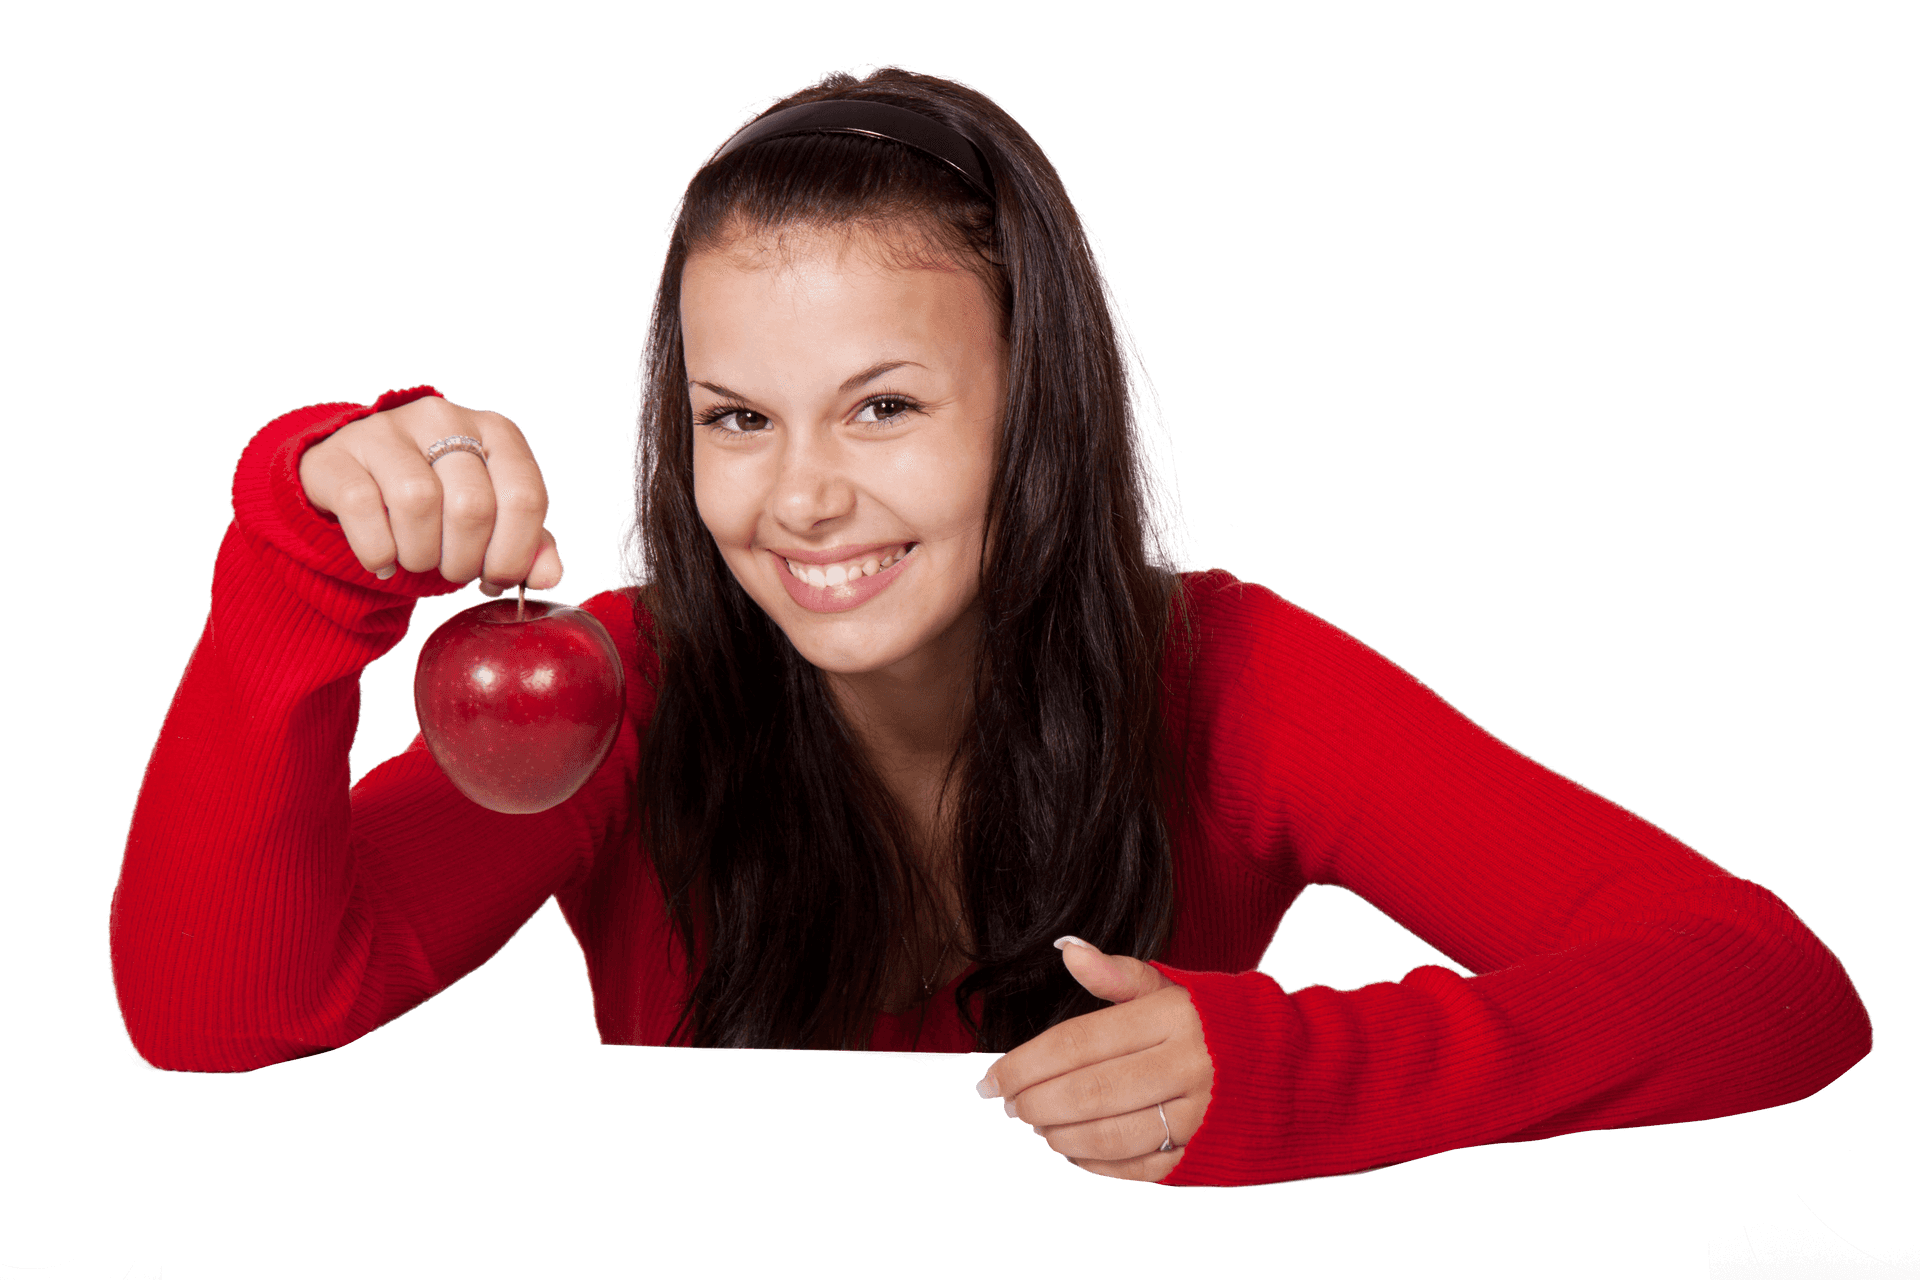 Smiling Girl Holding Red Apple PNG